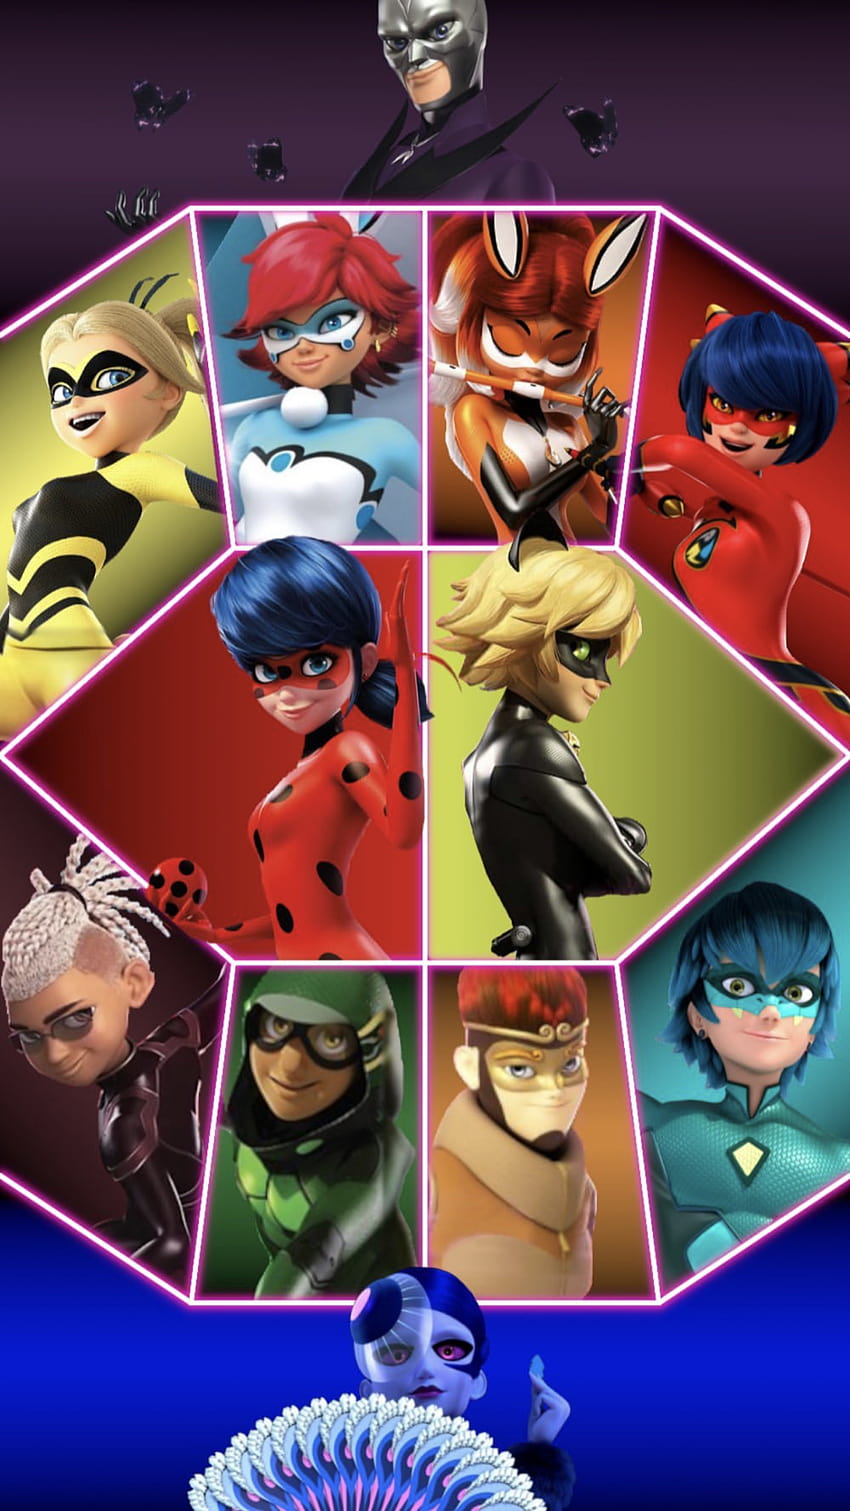 Miraculous Ladybug Blog on X: Friendly reminder that this is the poster  for Season 5 #Miraculous #MiraculousLadybug #MiraculousSeason4  #MiraculousSeason4Finale #MiraculousSeason5  / X